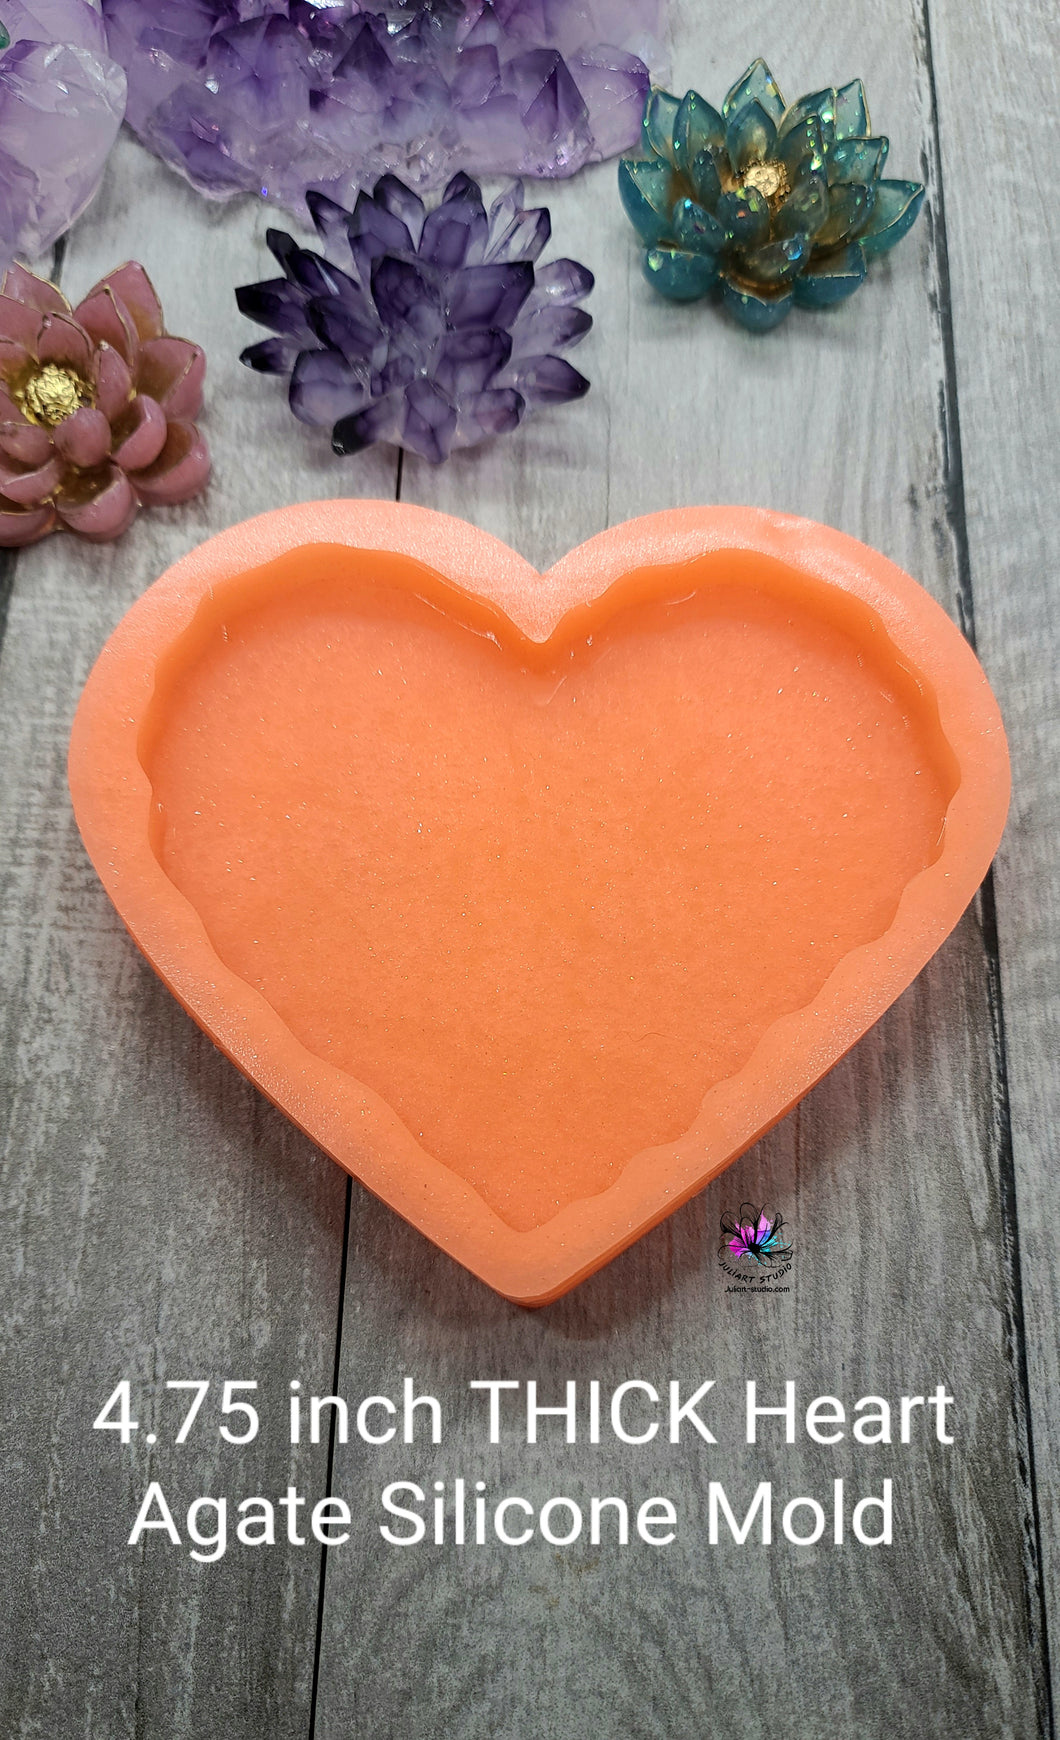 THICK Heart Agate Silicone Mold for Resin